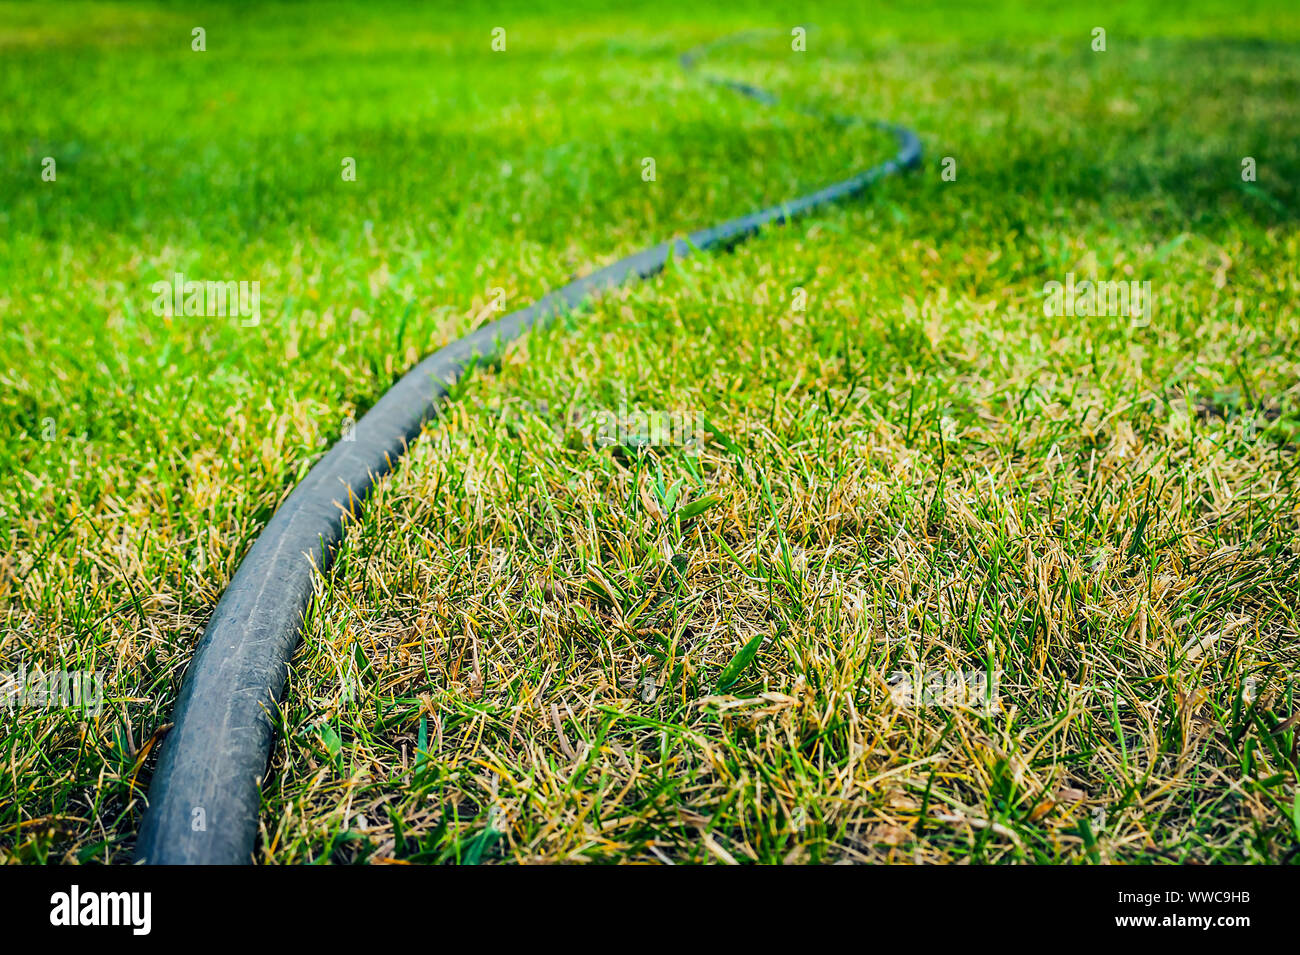 Low Angle View of Black Rubber Garden Hose on Green Lawn. Gardening Concept. Copy Space. Stock Photo